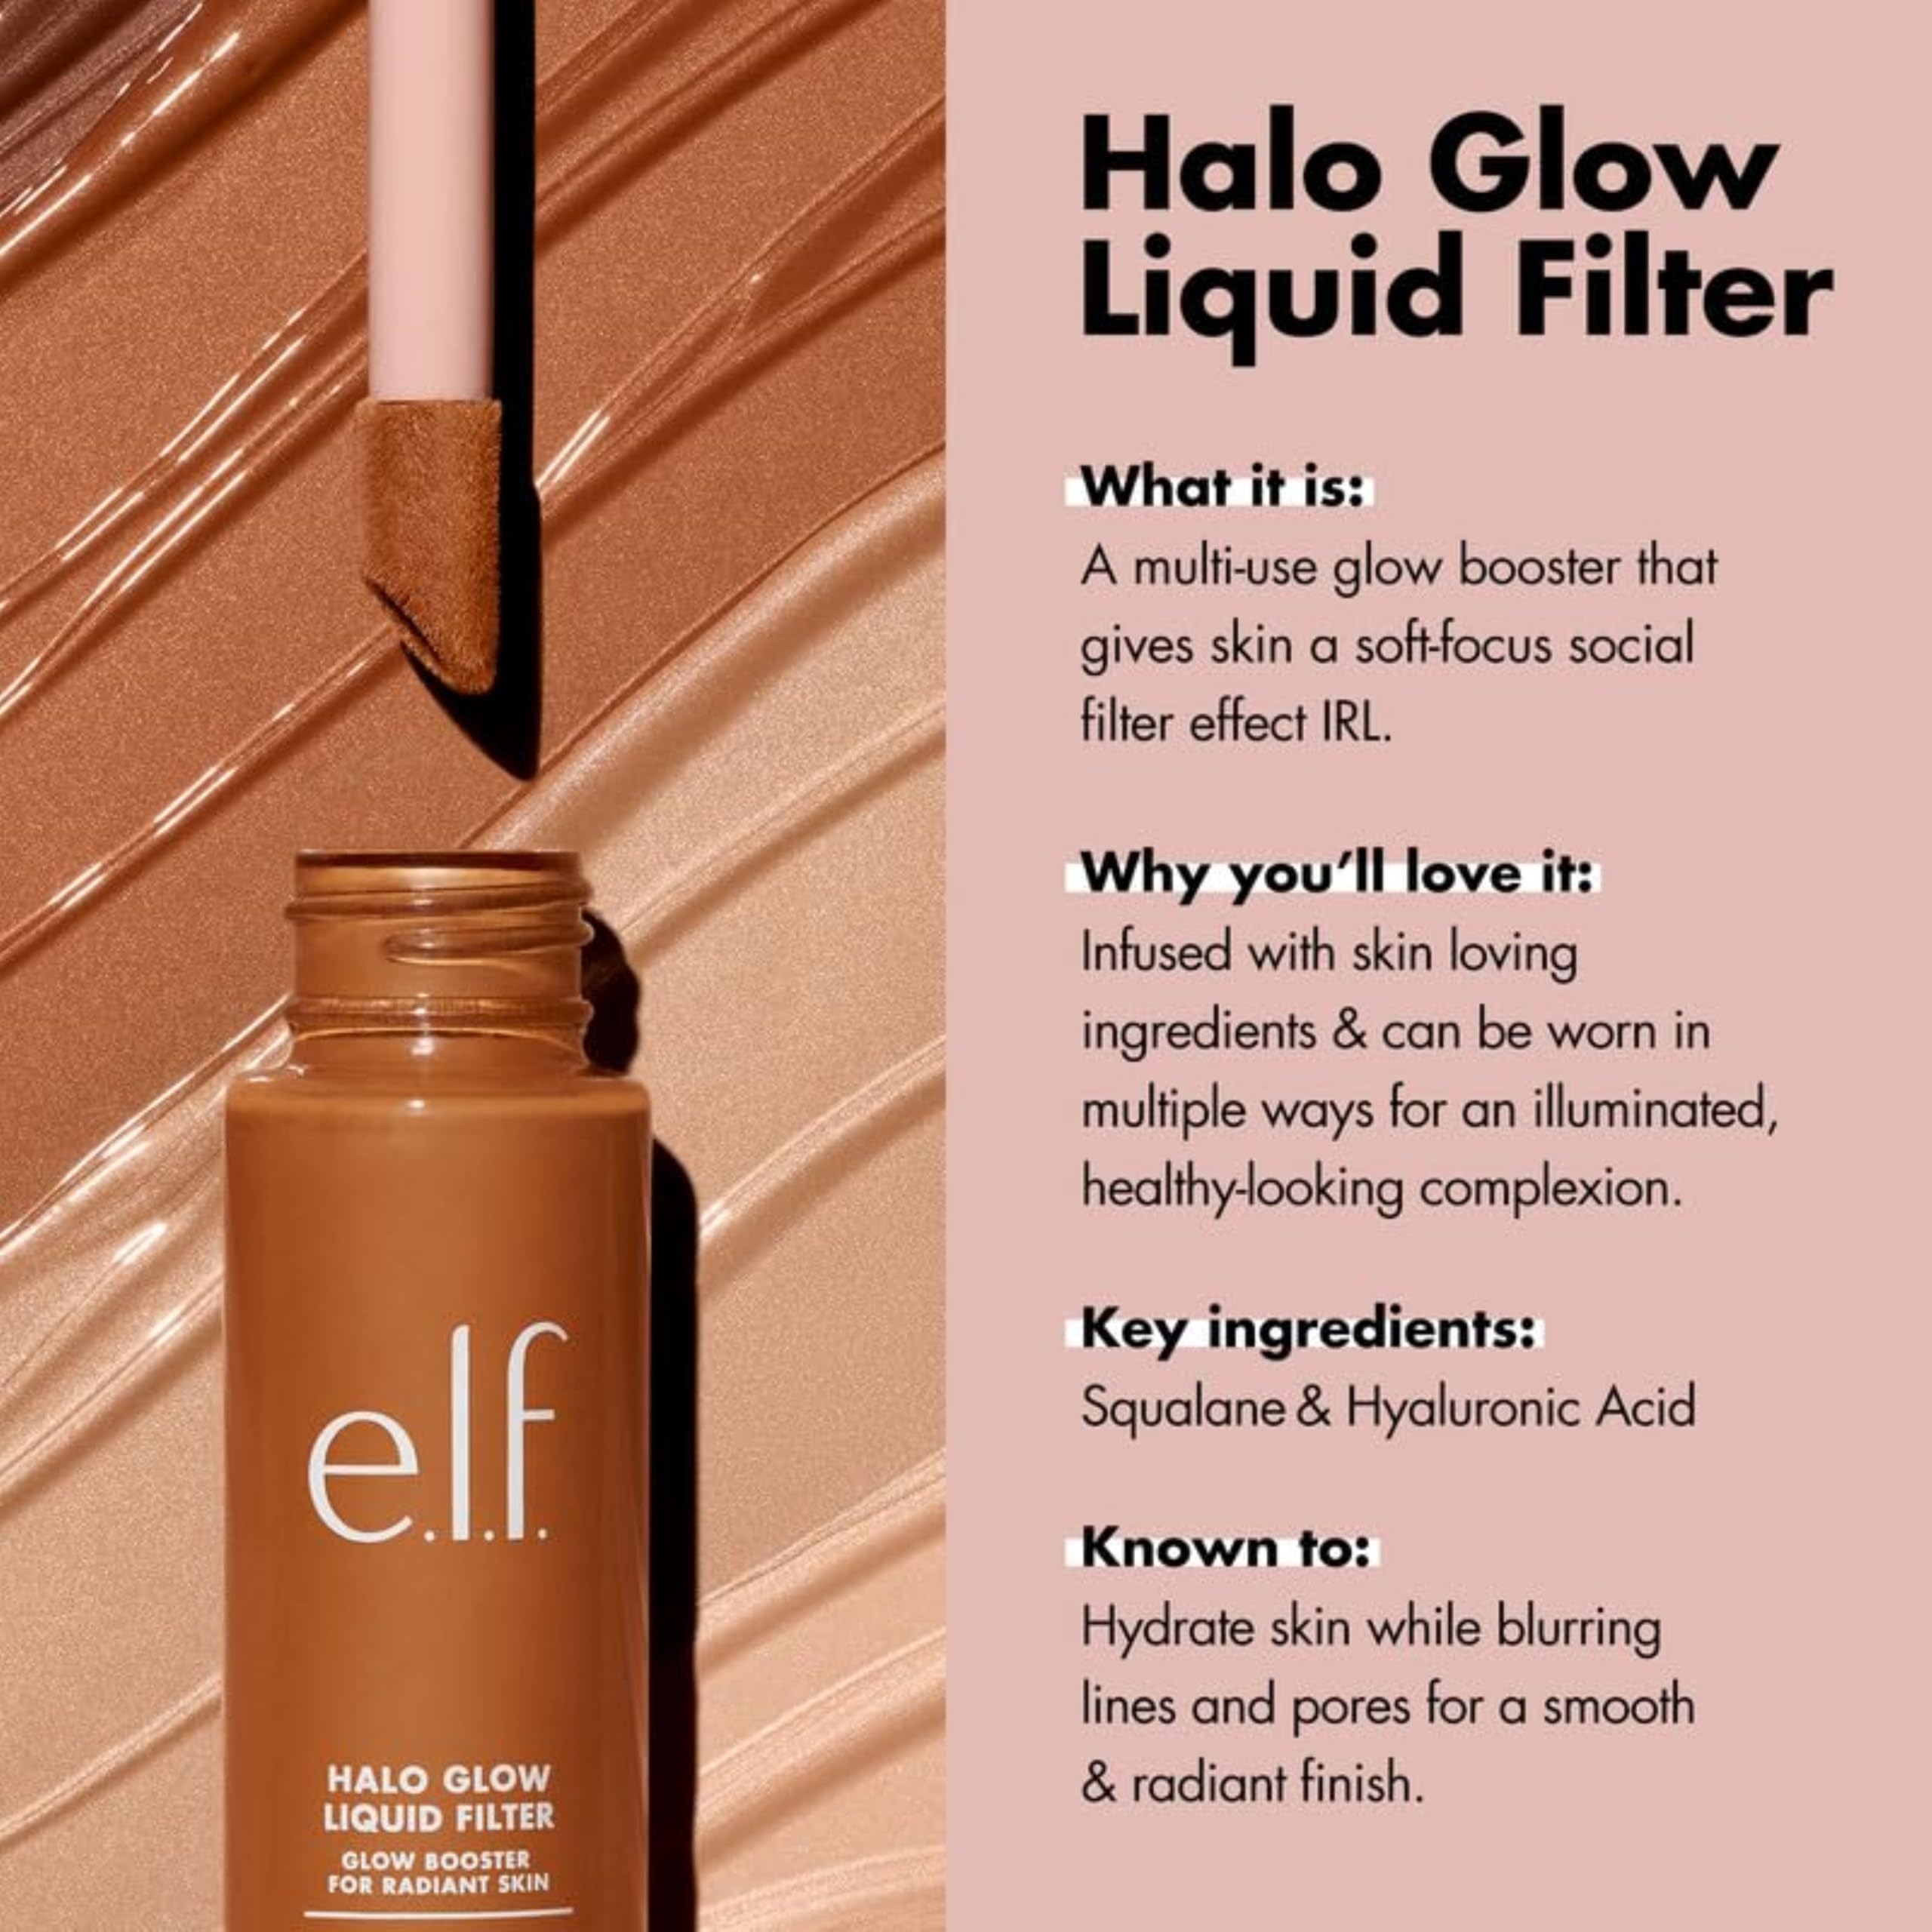 e.l.f. Halo Glow Liquid Filter, Complexion Booster For A Glowing, Soft-Focus Look, Infused With Hyaluronic Acid, Vegan & Cruelty-Free, 0 Fair